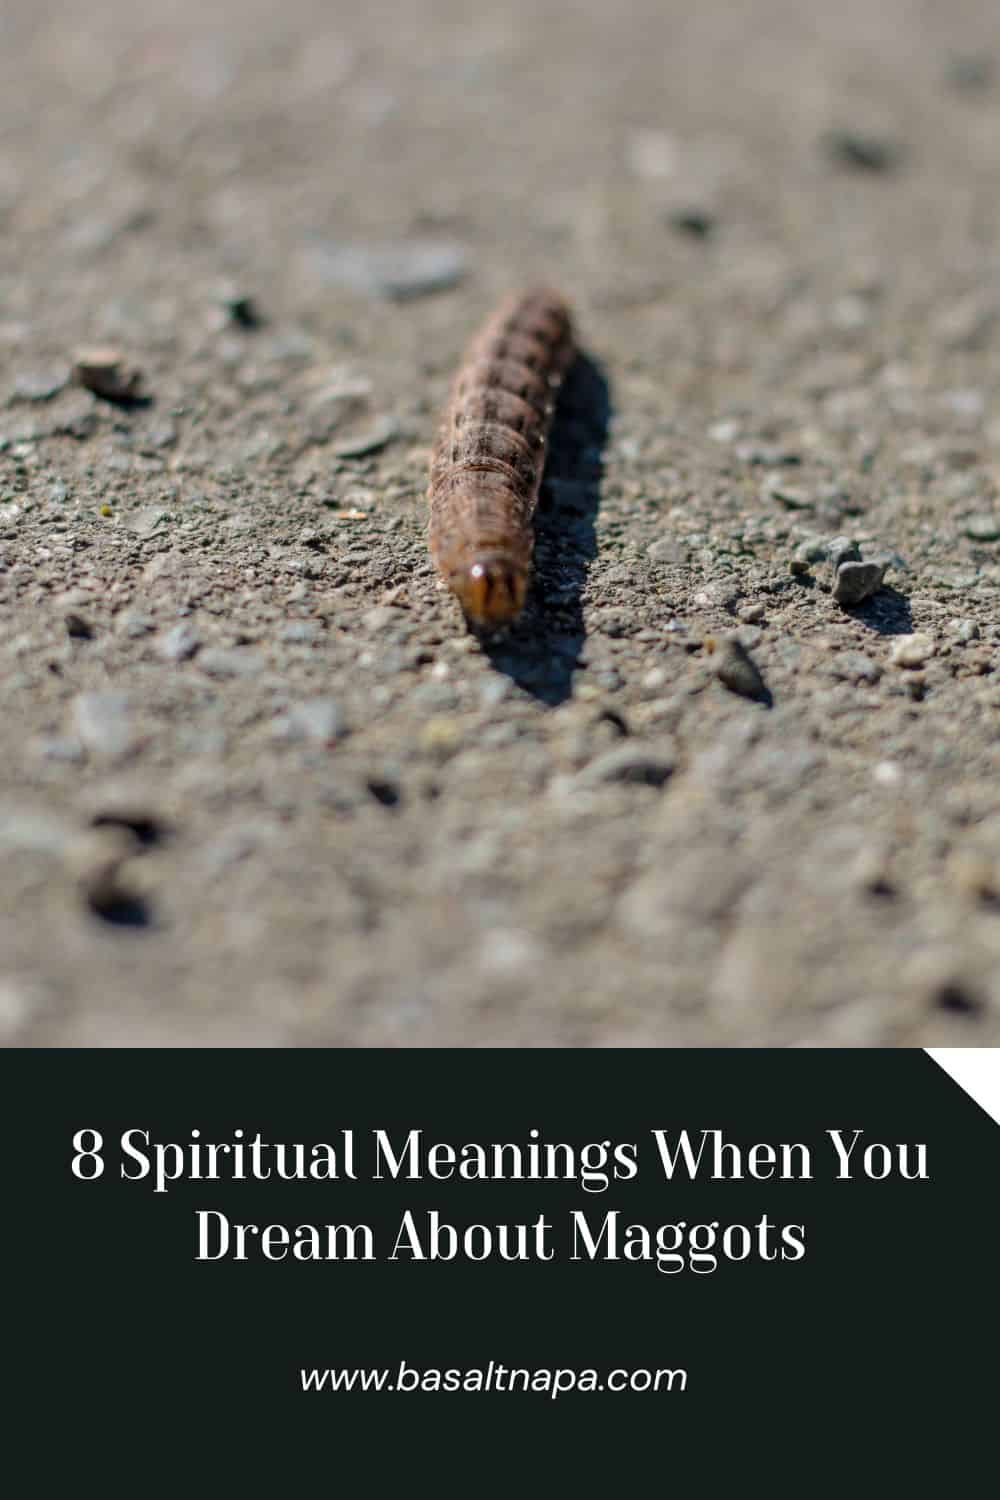 8 Spiritual Meanings When You Dream About Maggots